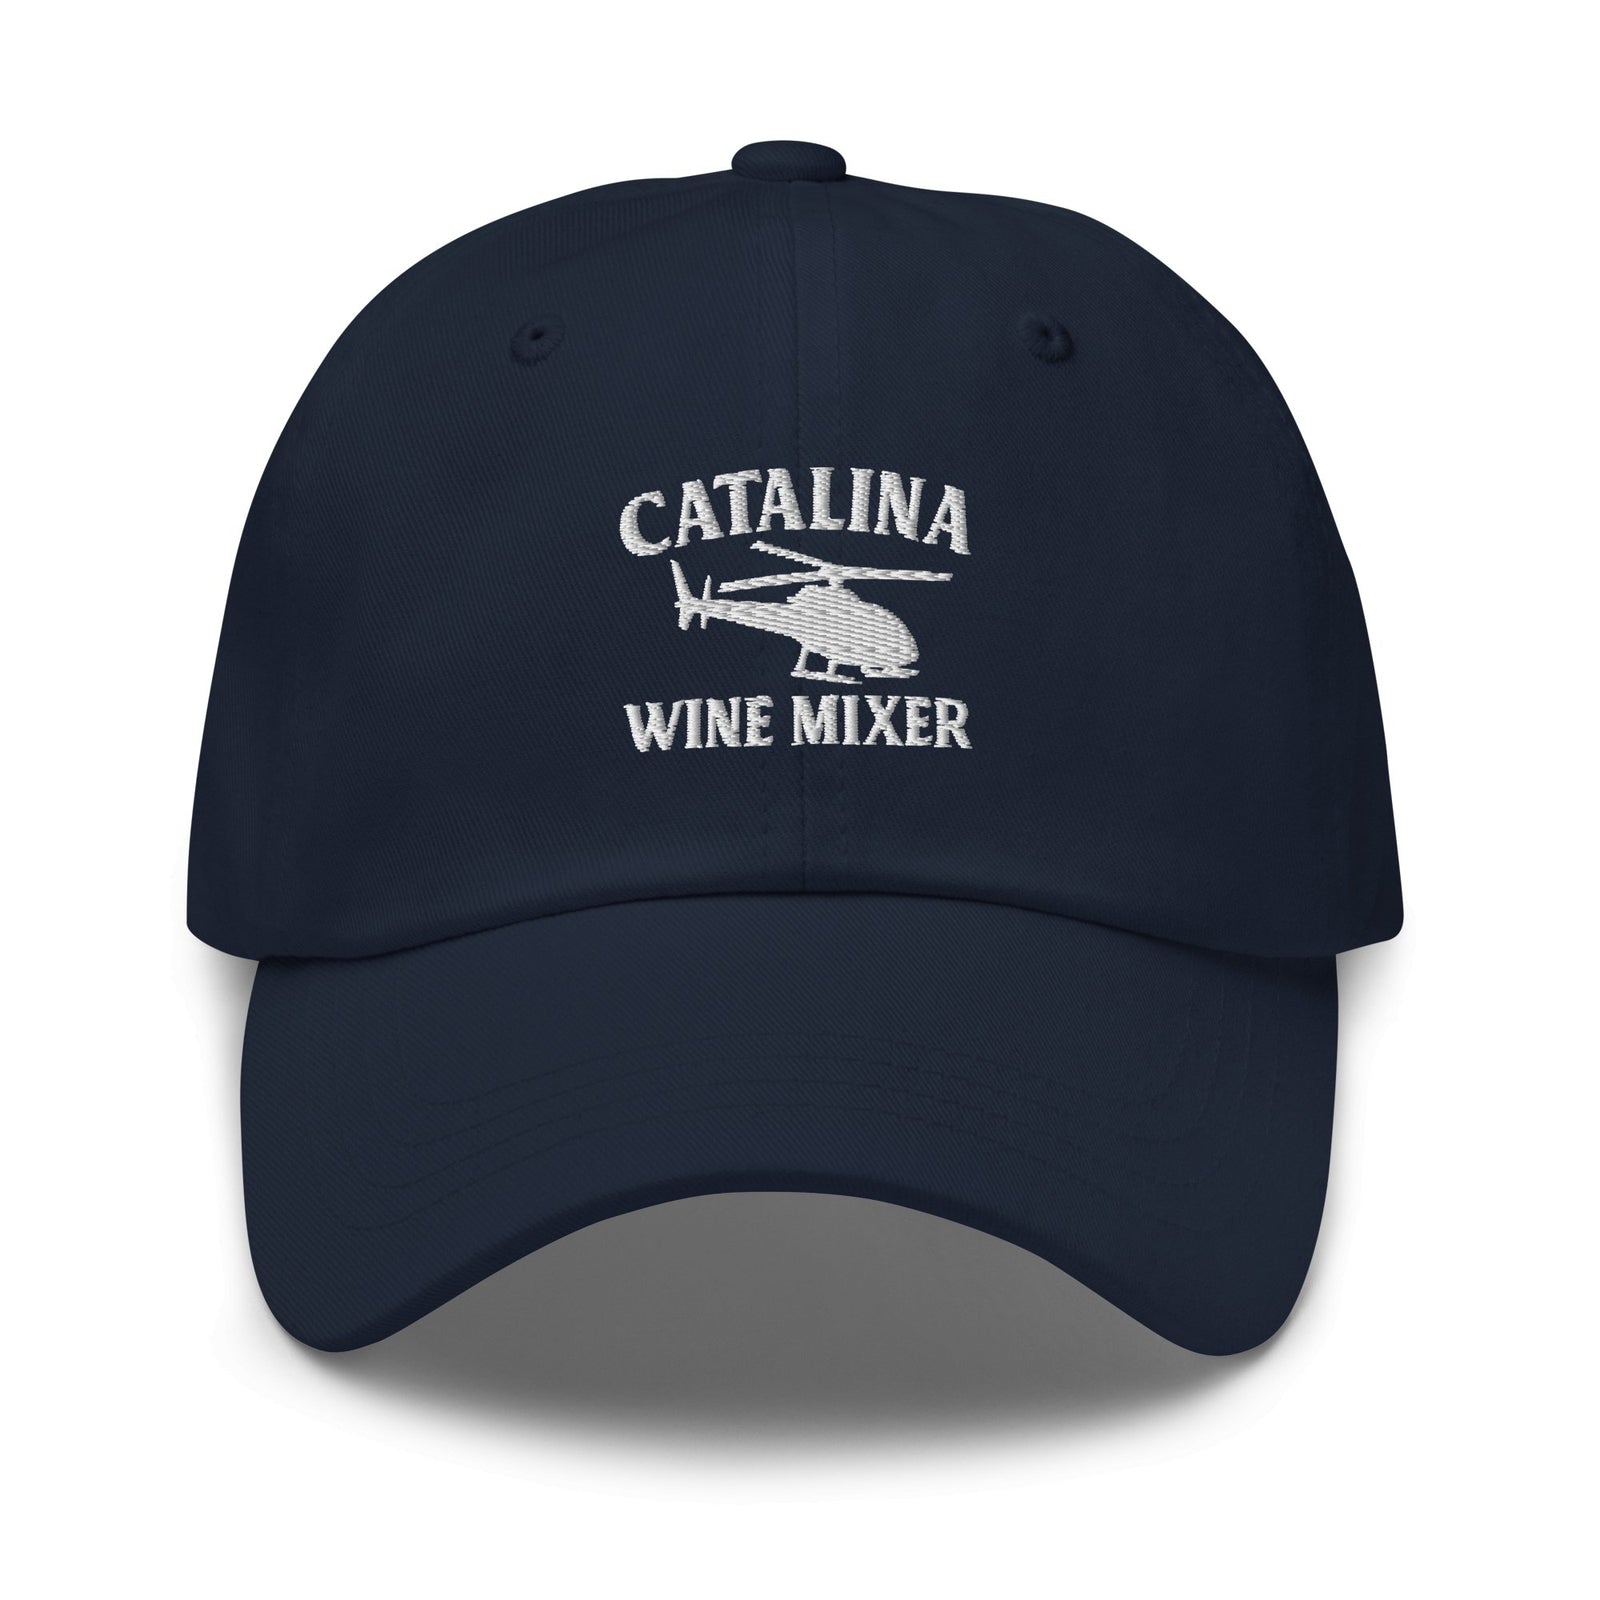 //cdn.shopify.com/s/files/1/0274/2488/2766/products/catalina-wine-mixer-dad-hat-406921_5000x.jpg?v=1653927058 5000w,
    //cdn.shopify.com/s/files/1/0274/2488/2766/products/catalina-wine-mixer-dad-hat-406921_4500x.jpg?v=1653927058 4500w,
    //cdn.shopify.com/s/files/1/0274/2488/2766/products/catalina-wine-mixer-dad-hat-406921_4000x.jpg?v=1653927058 4000w,
    //cdn.shopify.com/s/files/1/0274/2488/2766/products/catalina-wine-mixer-dad-hat-406921_3500x.jpg?v=1653927058 3500w,
    //cdn.shopify.com/s/files/1/0274/2488/2766/products/catalina-wine-mixer-dad-hat-406921_3000x.jpg?v=1653927058 3000w,
    //cdn.shopify.com/s/files/1/0274/2488/2766/products/catalina-wine-mixer-dad-hat-406921_2500x.jpg?v=1653927058 2500w,
    //cdn.shopify.com/s/files/1/0274/2488/2766/products/catalina-wine-mixer-dad-hat-406921_2000x.jpg?v=1653927058 2000w,
    //cdn.shopify.com/s/files/1/0274/2488/2766/products/catalina-wine-mixer-dad-hat-406921_1800x.jpg?v=1653927058 1800w,
    //cdn.shopify.com/s/files/1/0274/2488/2766/products/catalina-wine-mixer-dad-hat-406921_1600x.jpg?v=1653927058 1600w,
    //cdn.shopify.com/s/files/1/0274/2488/2766/products/catalina-wine-mixer-dad-hat-406921_1400x.jpg?v=1653927058 1400w,
    //cdn.shopify.com/s/files/1/0274/2488/2766/products/catalina-wine-mixer-dad-hat-406921_1200x.jpg?v=1653927058 1200w,
    //cdn.shopify.com/s/files/1/0274/2488/2766/products/catalina-wine-mixer-dad-hat-406921_1000x.jpg?v=1653927058 1000w,
    //cdn.shopify.com/s/files/1/0274/2488/2766/products/catalina-wine-mixer-dad-hat-406921_800x.jpg?v=1653927058 800w,
    //cdn.shopify.com/s/files/1/0274/2488/2766/products/catalina-wine-mixer-dad-hat-406921_600x.jpg?v=1653927058 600w,
    //cdn.shopify.com/s/files/1/0274/2488/2766/products/catalina-wine-mixer-dad-hat-406921_400x.jpg?v=1653927058 400w,
    //cdn.shopify.com/s/files/1/0274/2488/2766/products/catalina-wine-mixer-dad-hat-406921_200x.jpg?v=1653927058 200w